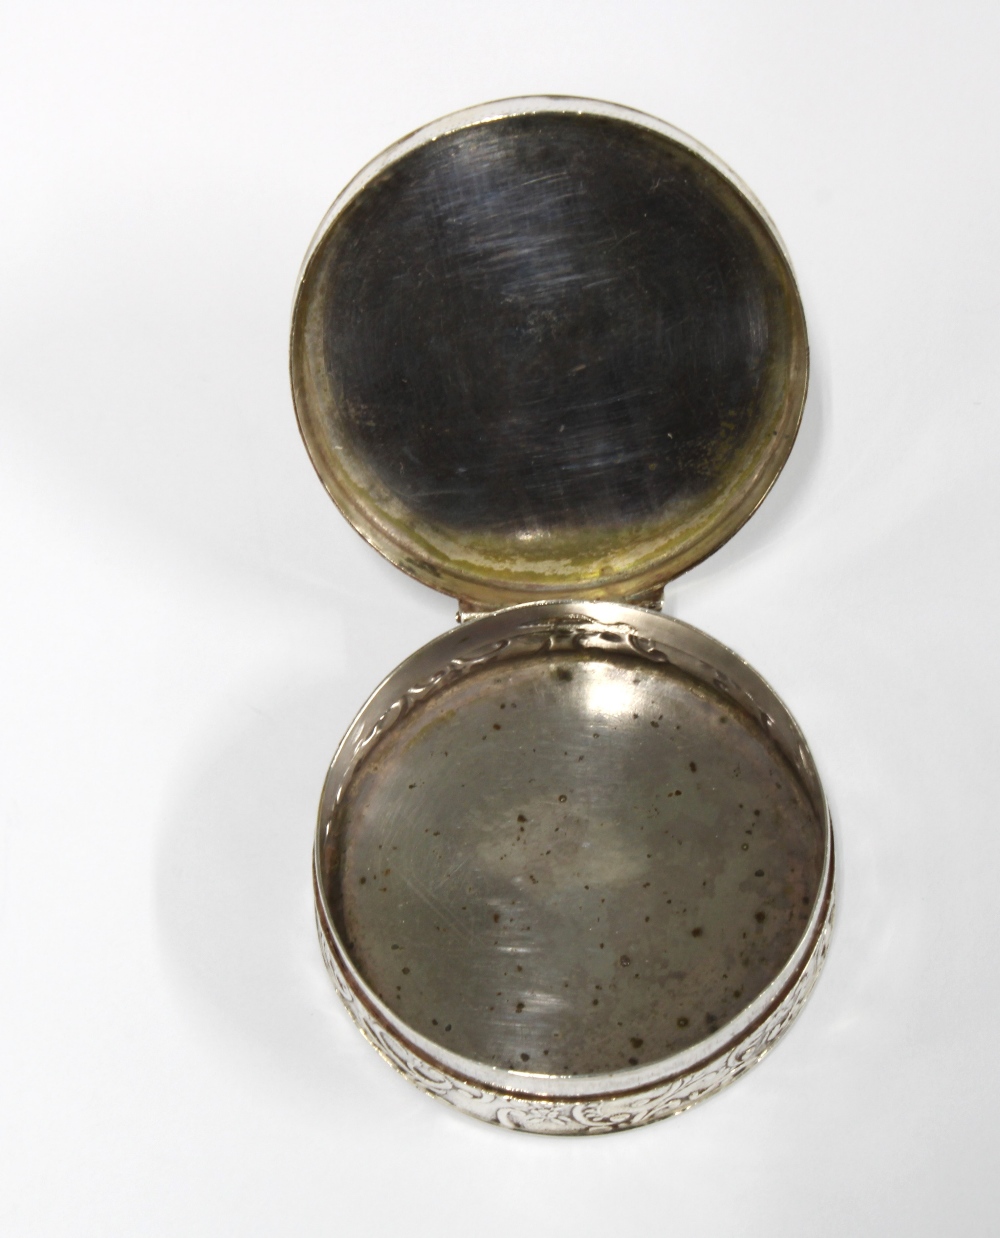 Dutch silver pill box, circular form, hinged lid with an engraved pattern and with repousee side - Image 2 of 2